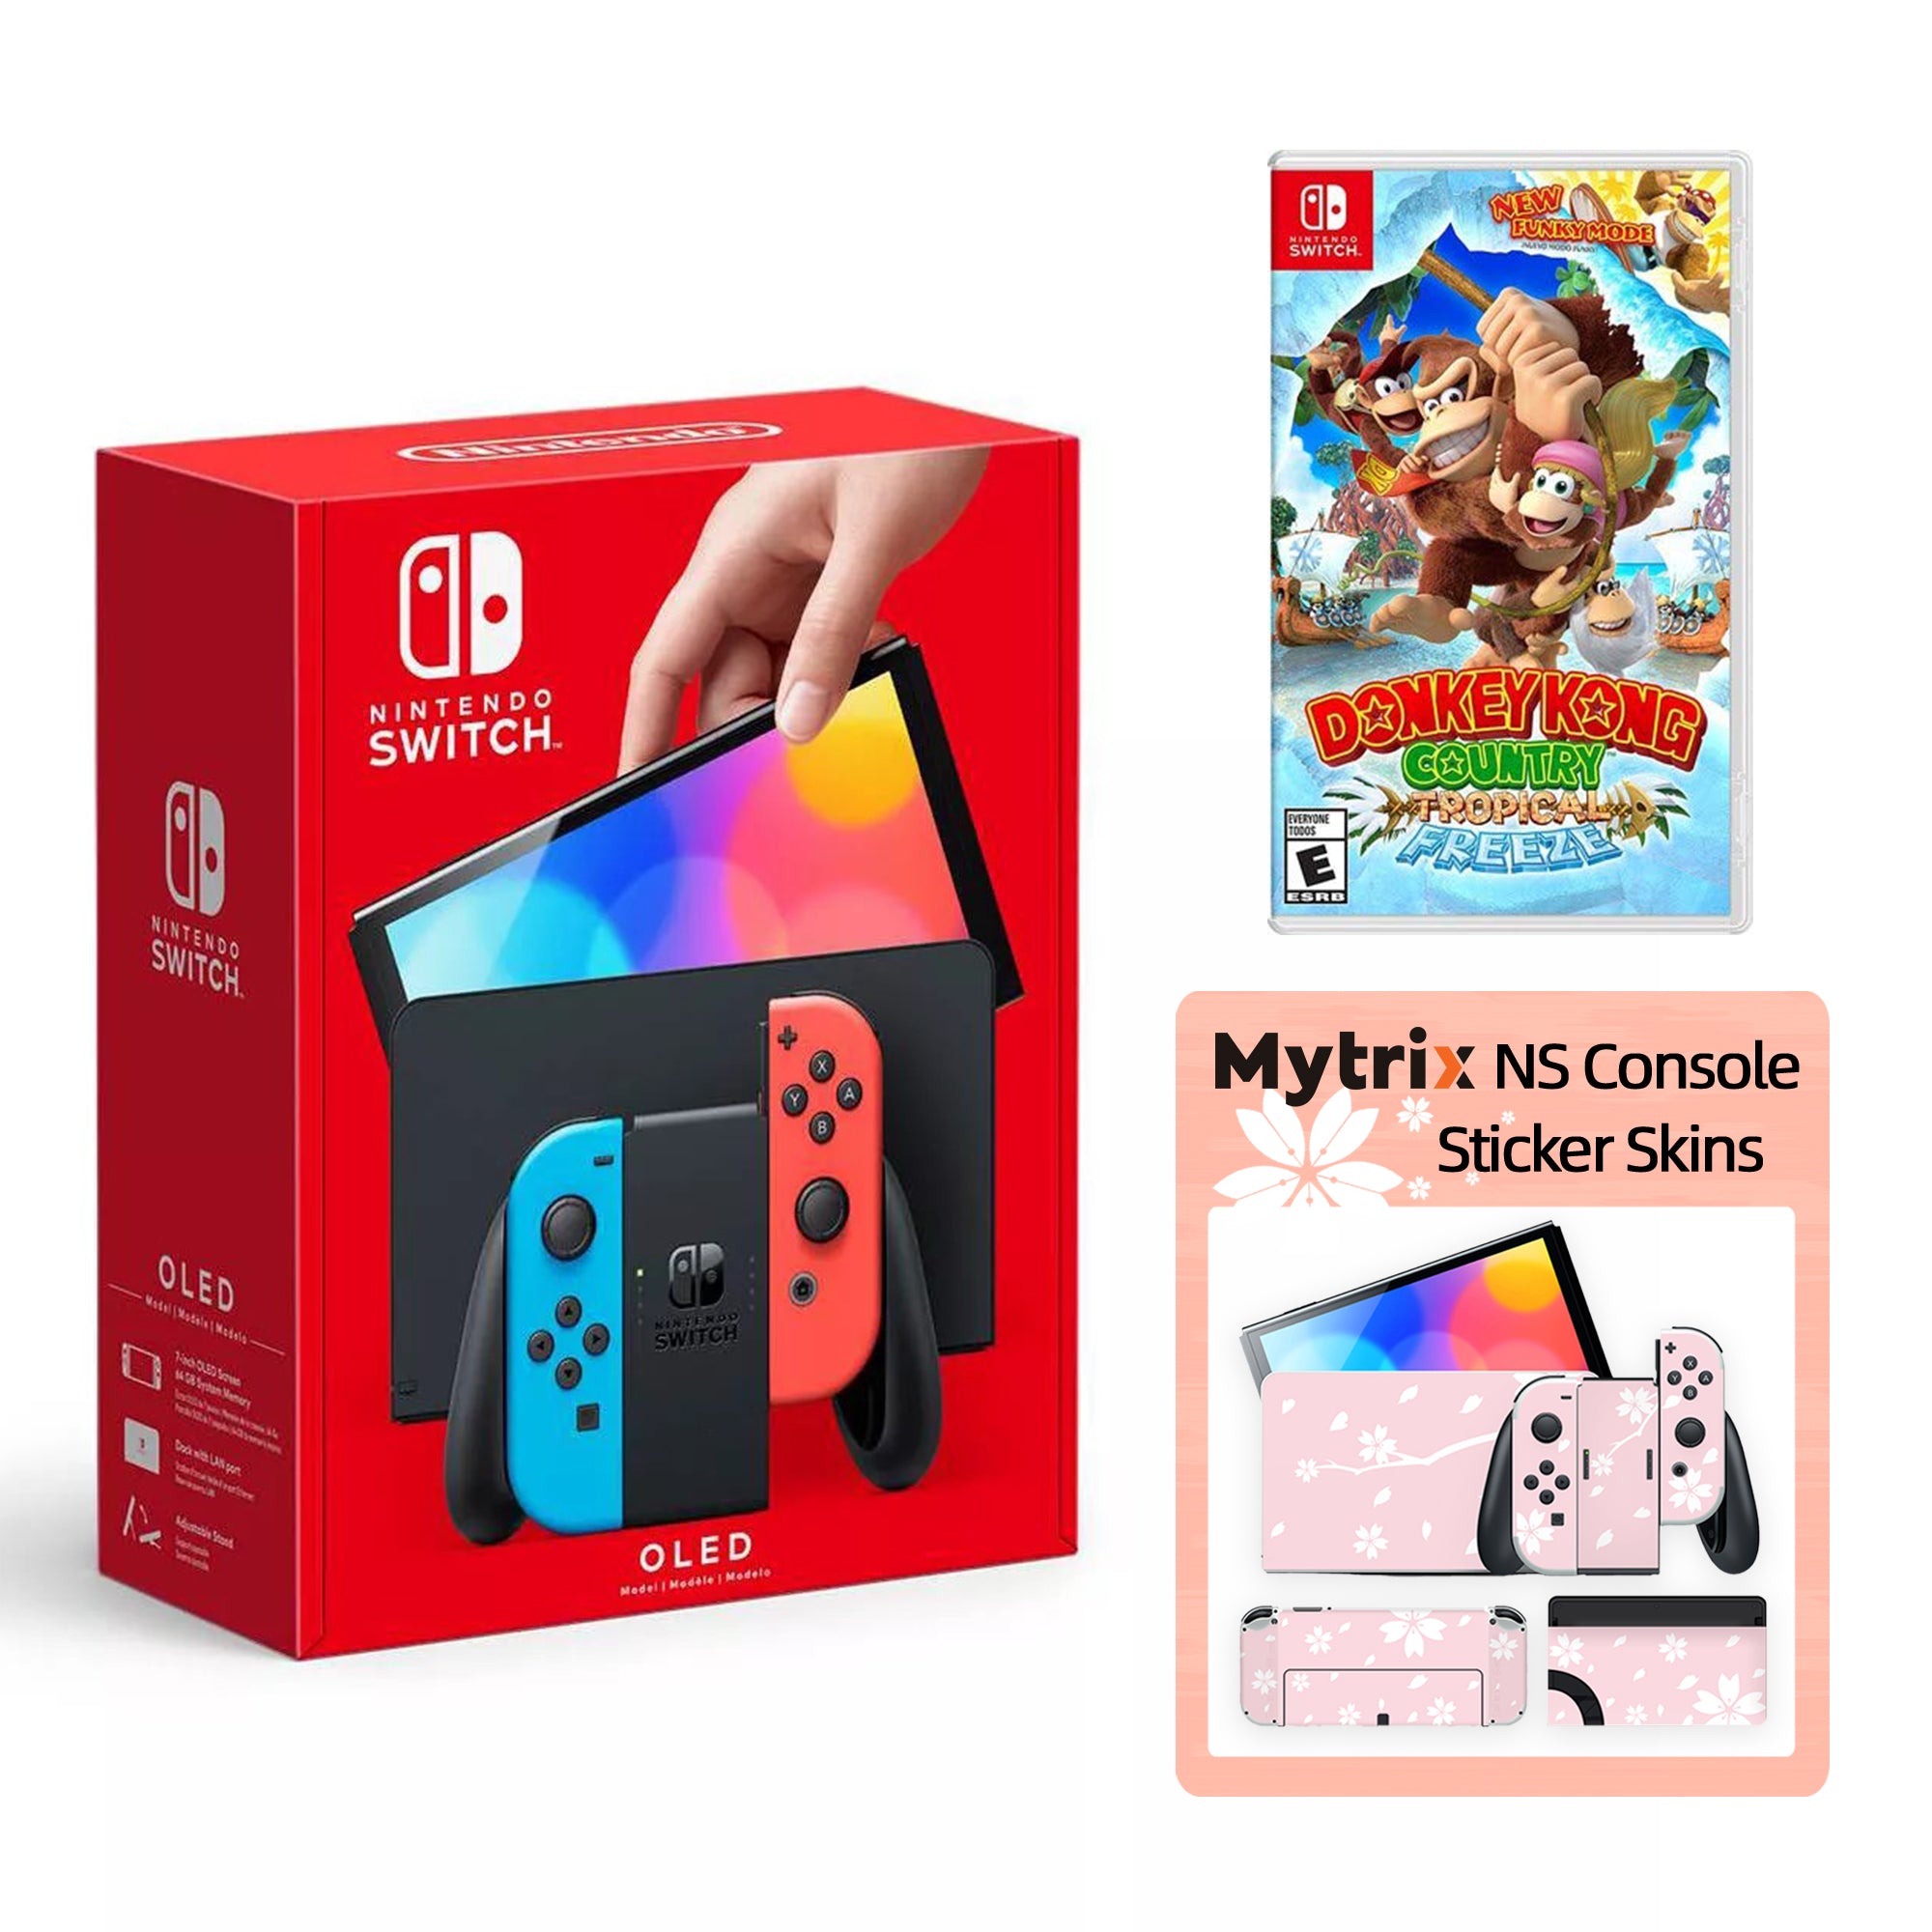 2022 New Nintendo Switch OLED Model Neon Red Blue with Donkey Kong Country and Mytrix Full Body Skin Sticker for NS OLED Console, Dock and Joycons - Sakura Pink